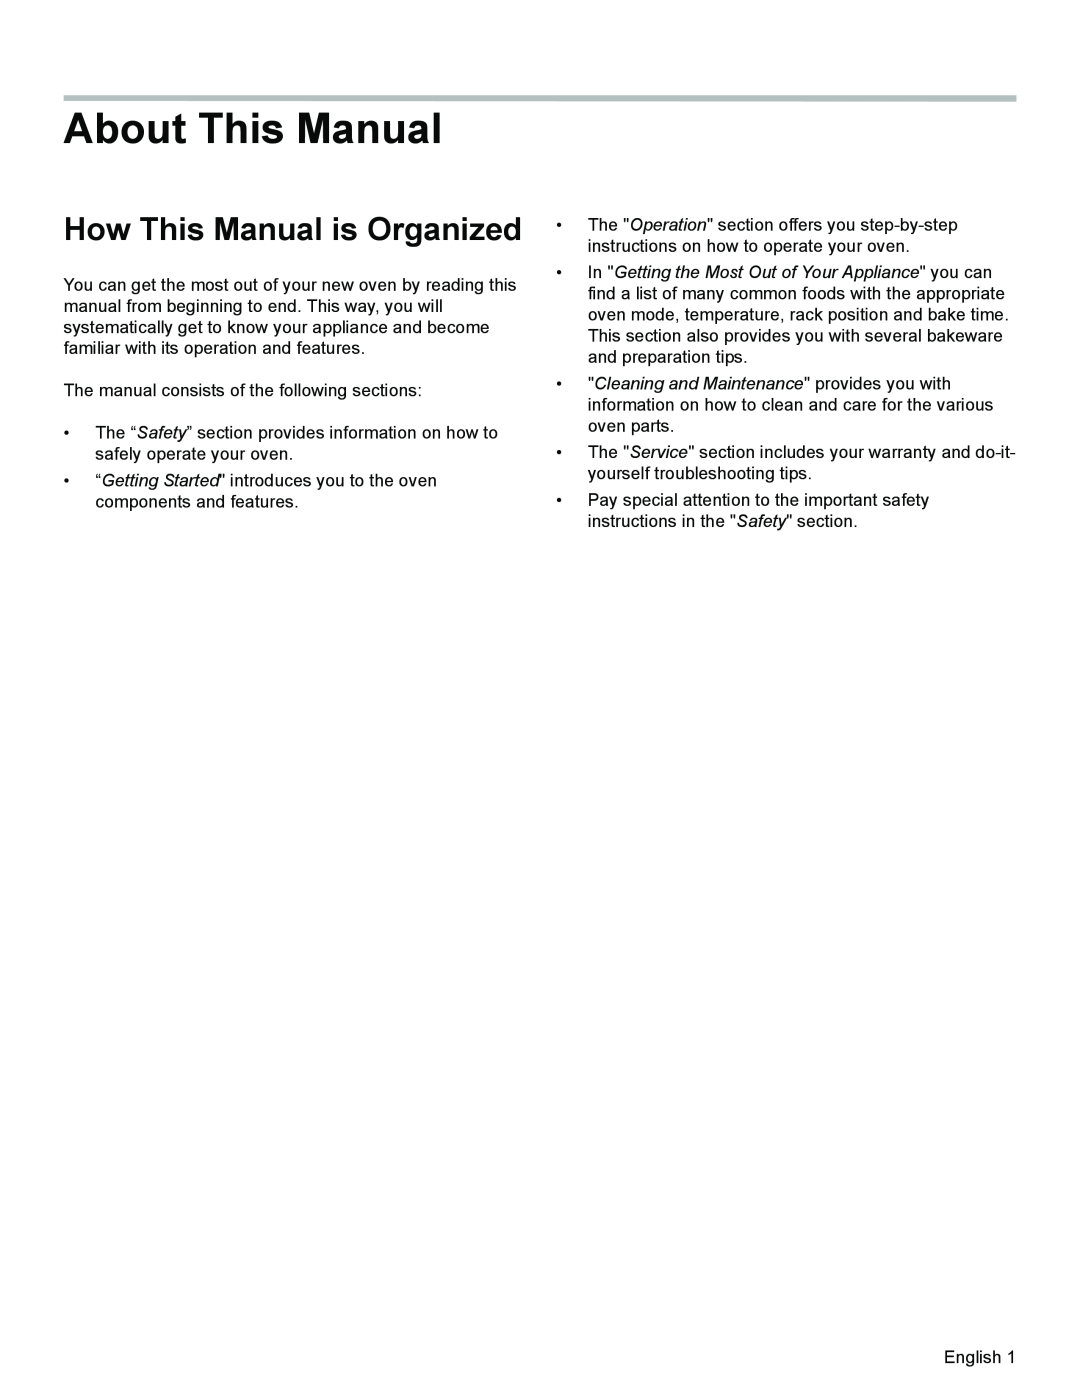 Bosch Appliances HES3063U manual About This Manual, How This Manual is Organized 